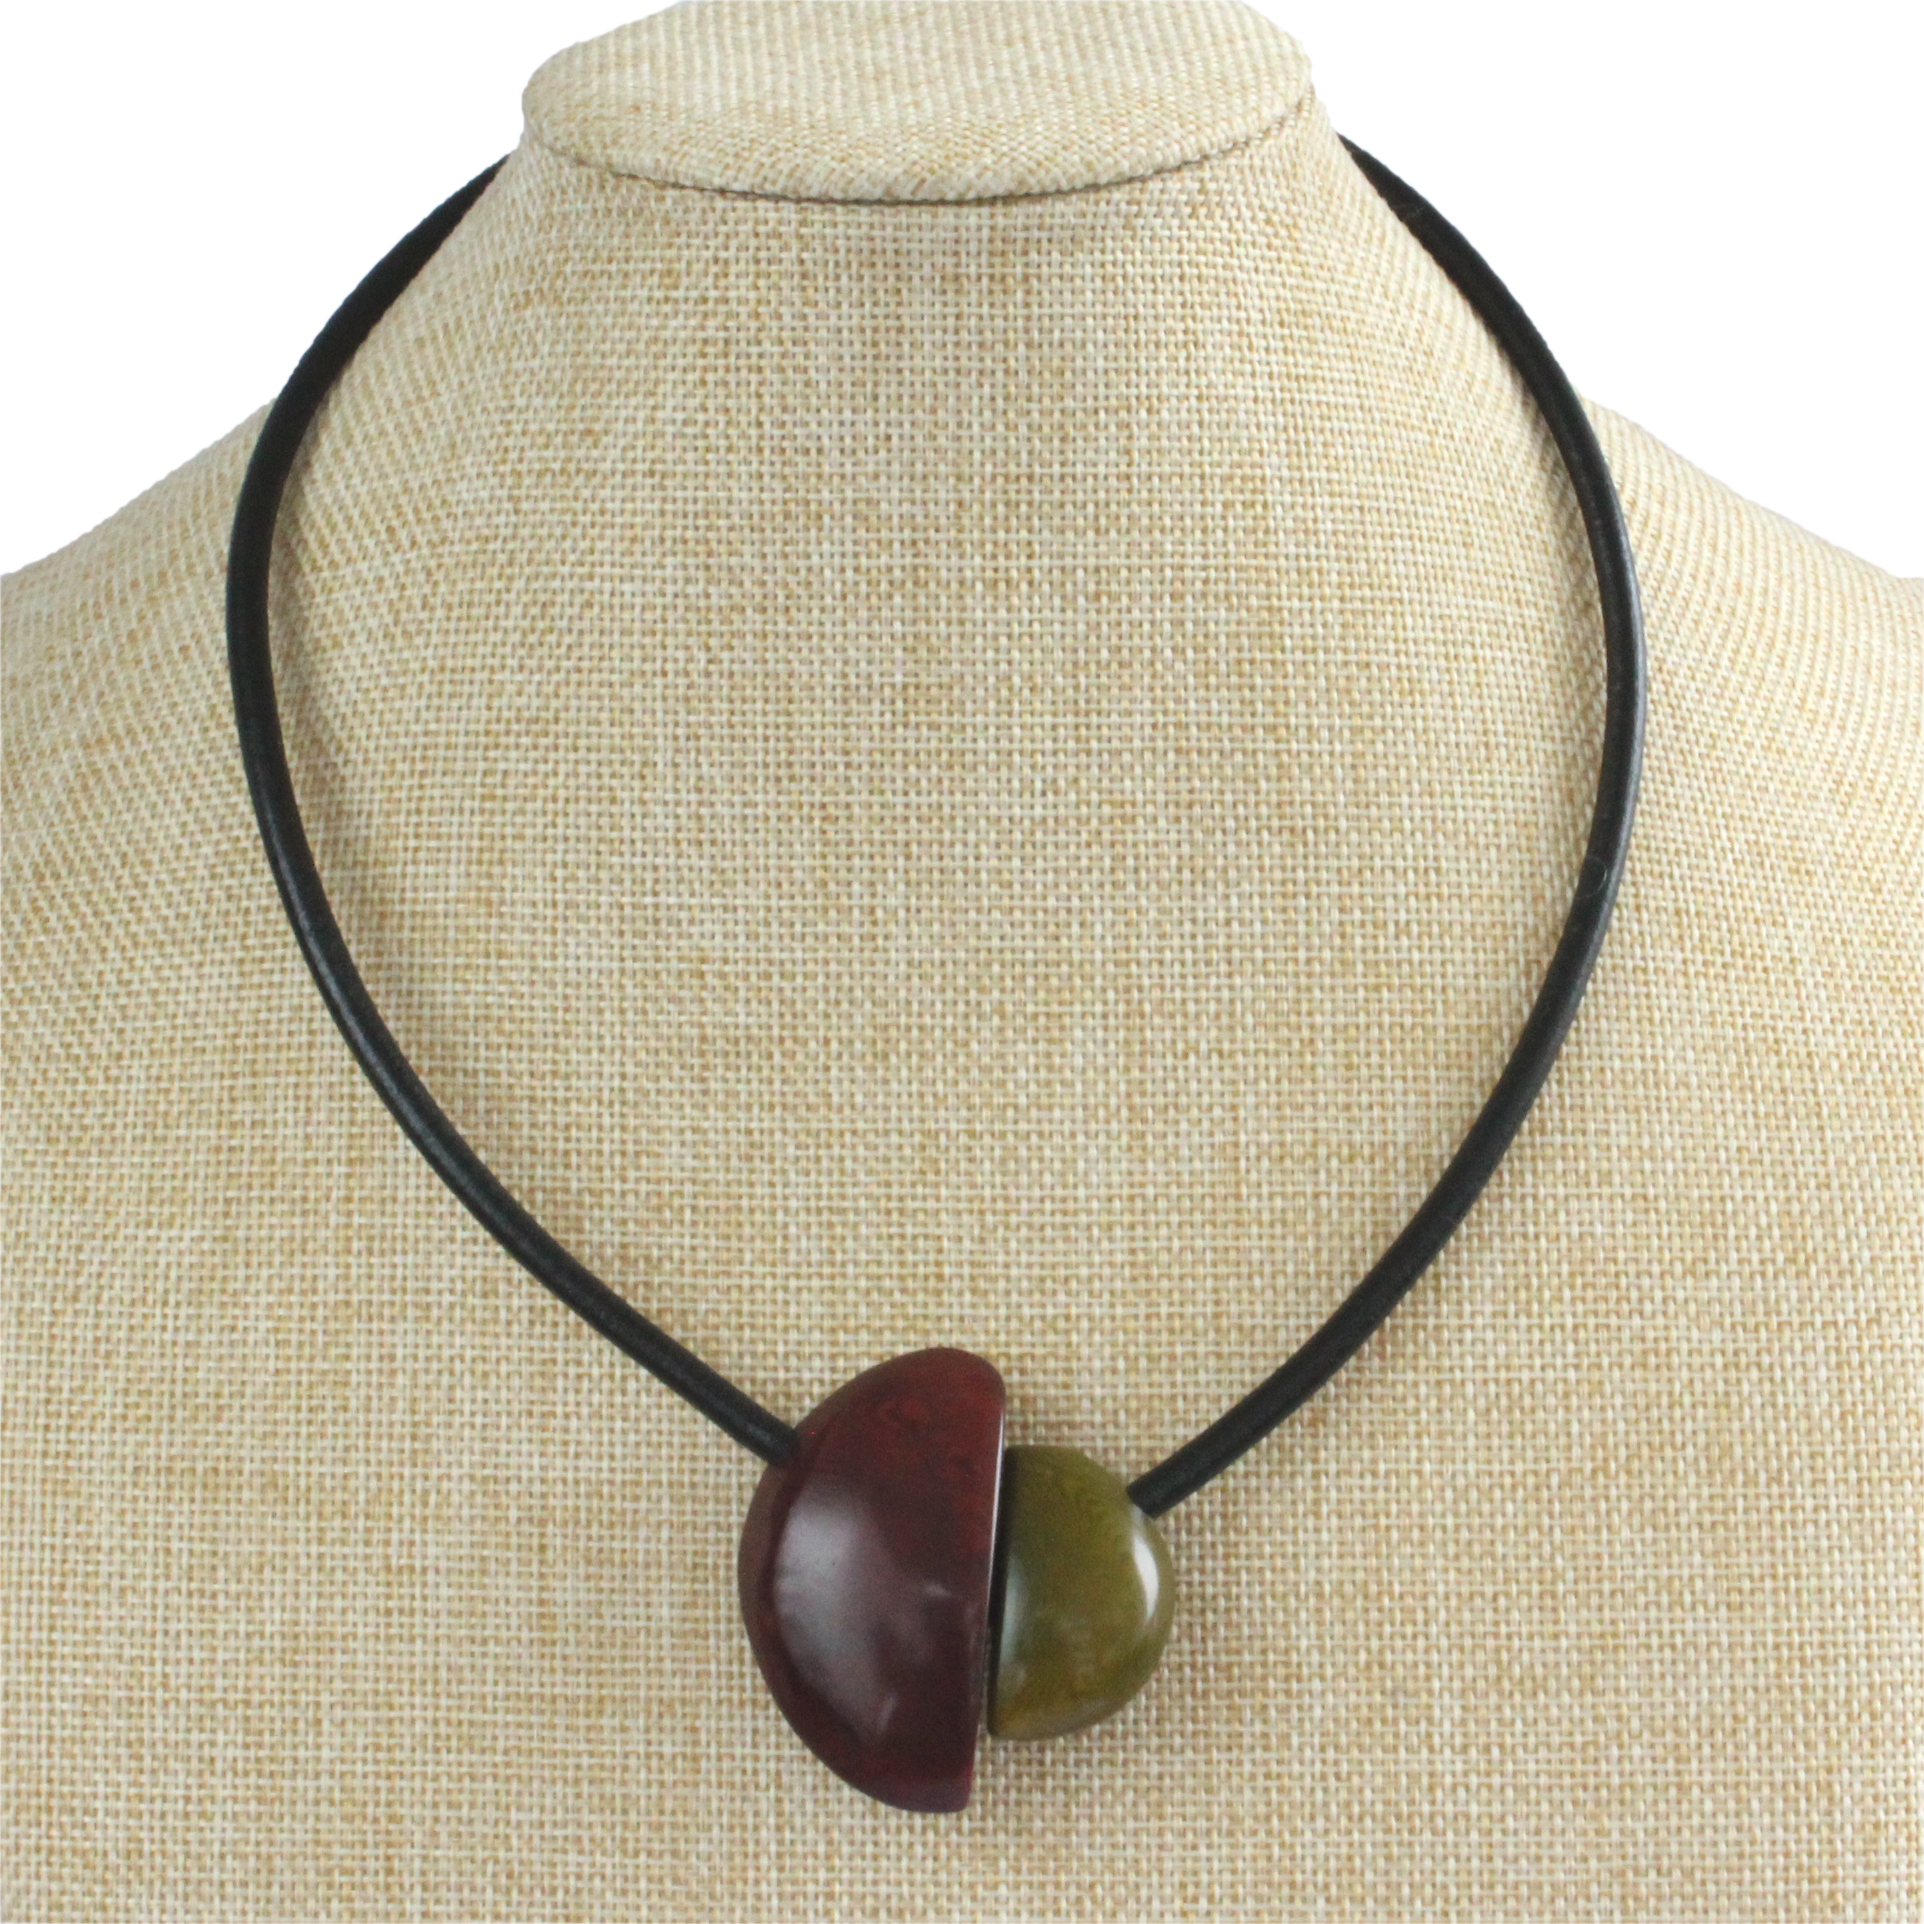 Handmade necklace, tagua nut, burgundy olive, stand, magnetic